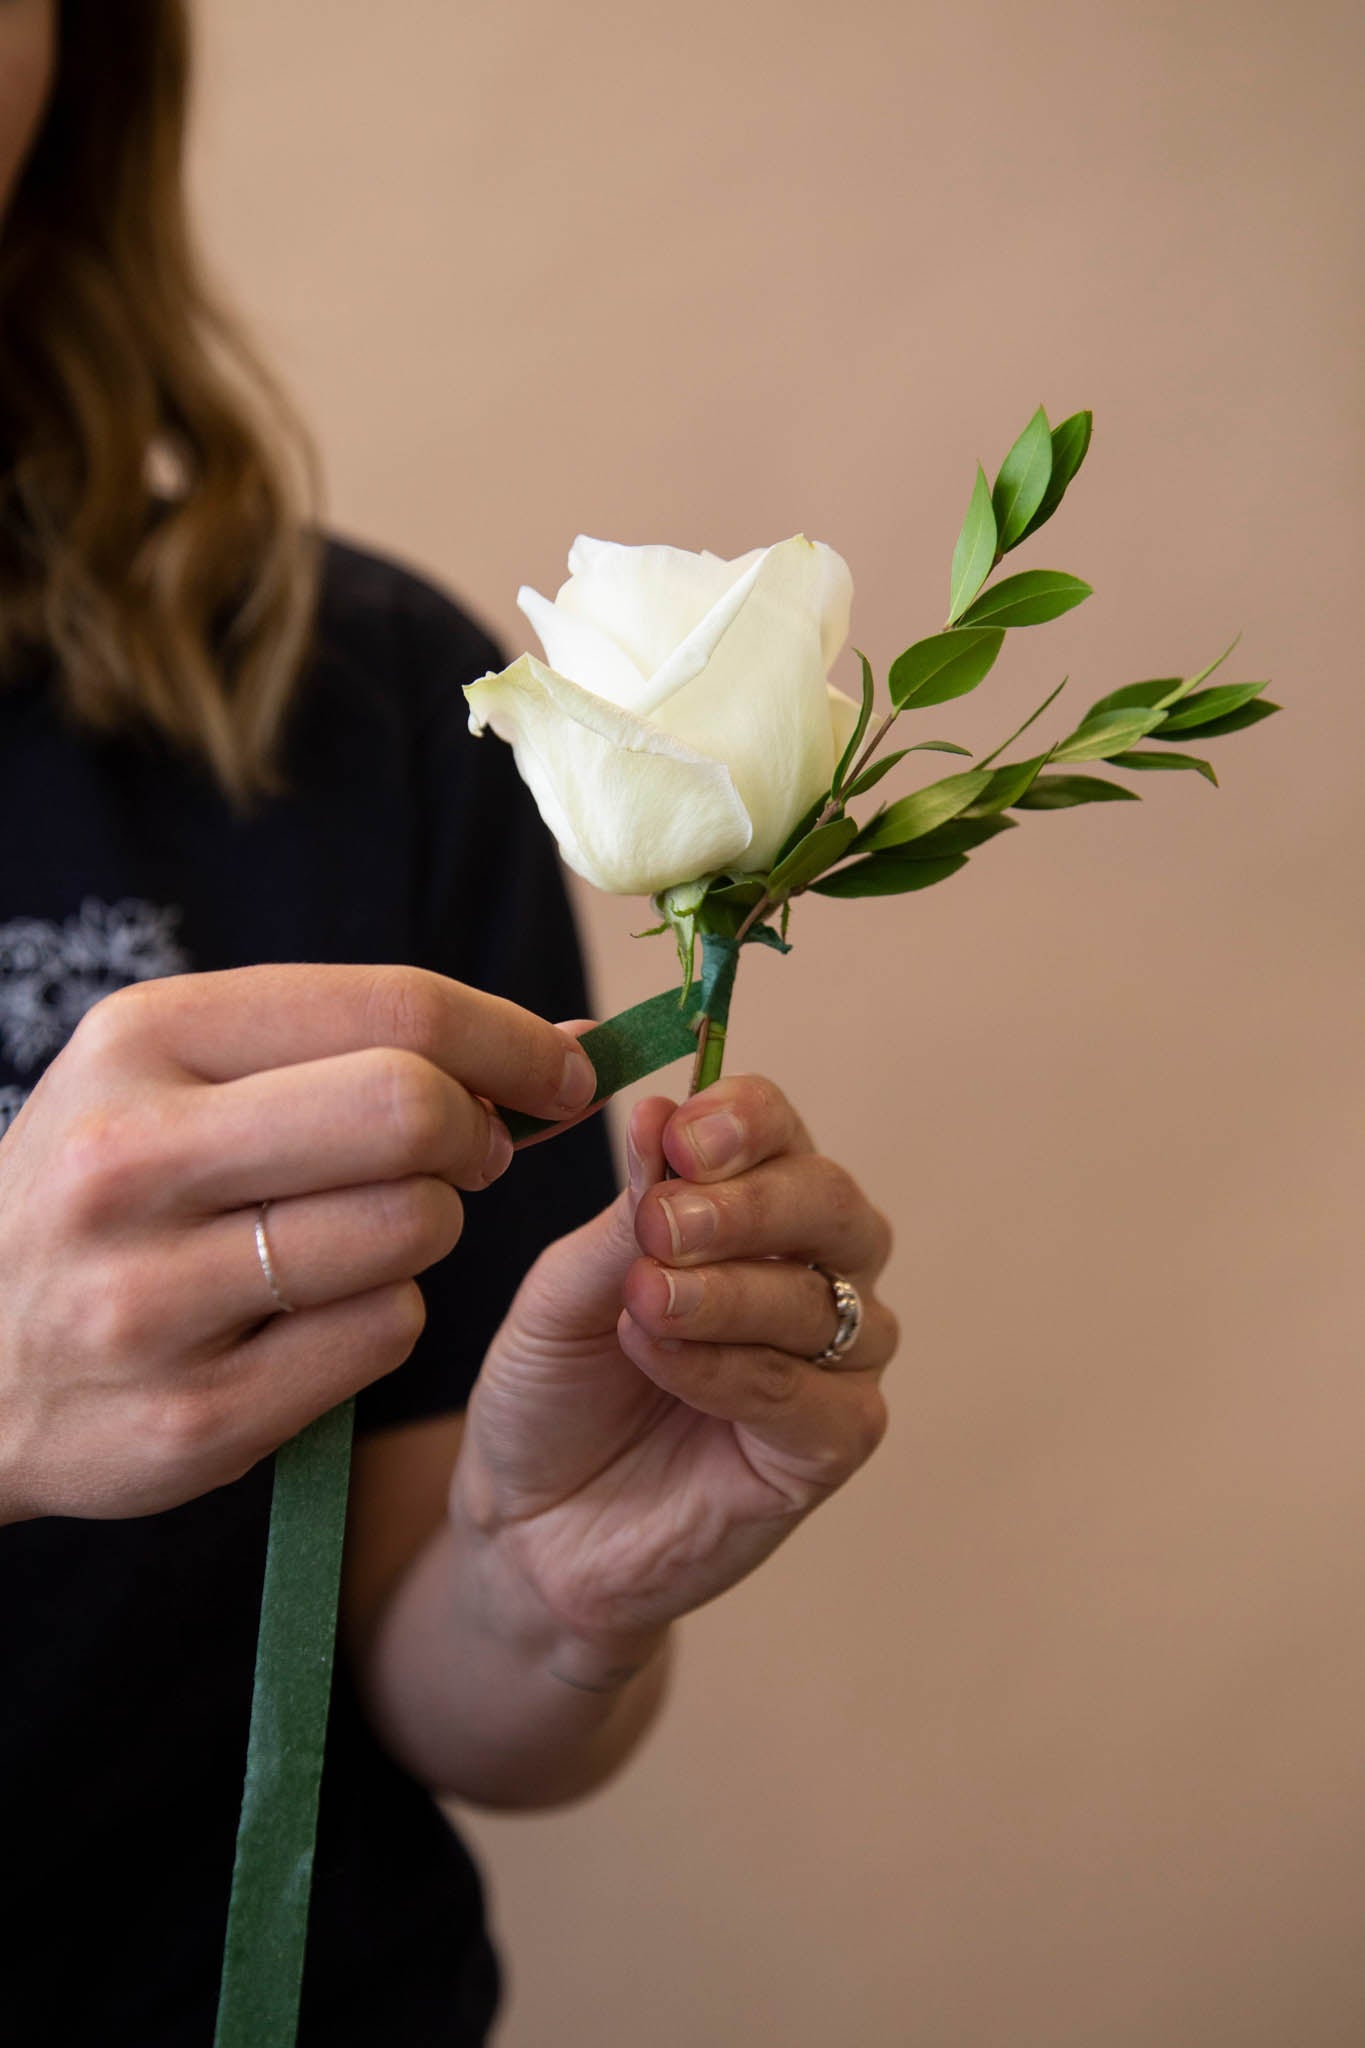 Start off DIY boutonniere by taping greenery behind focal flower